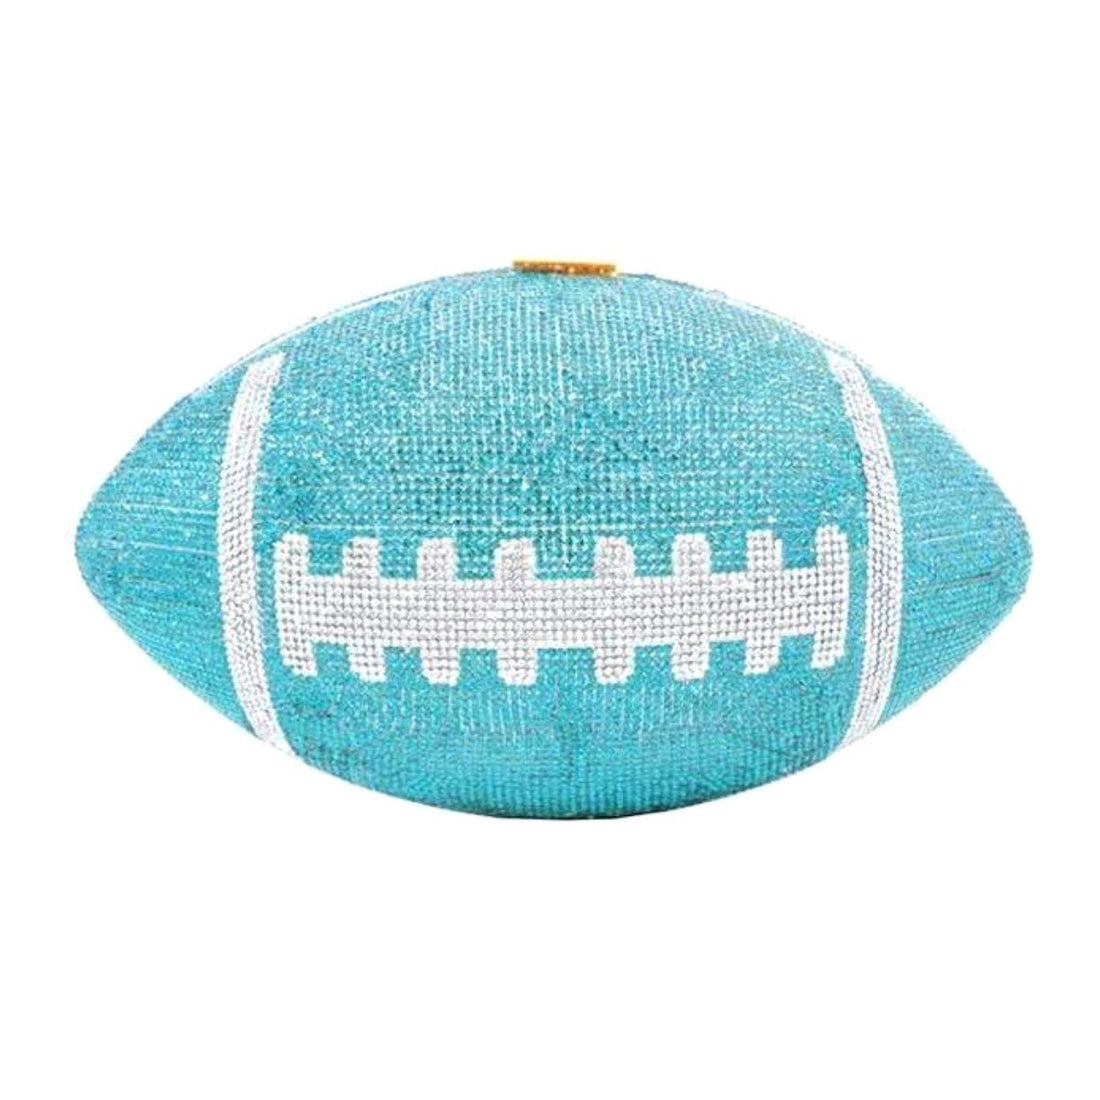 Turquoise Bling Football Clutch